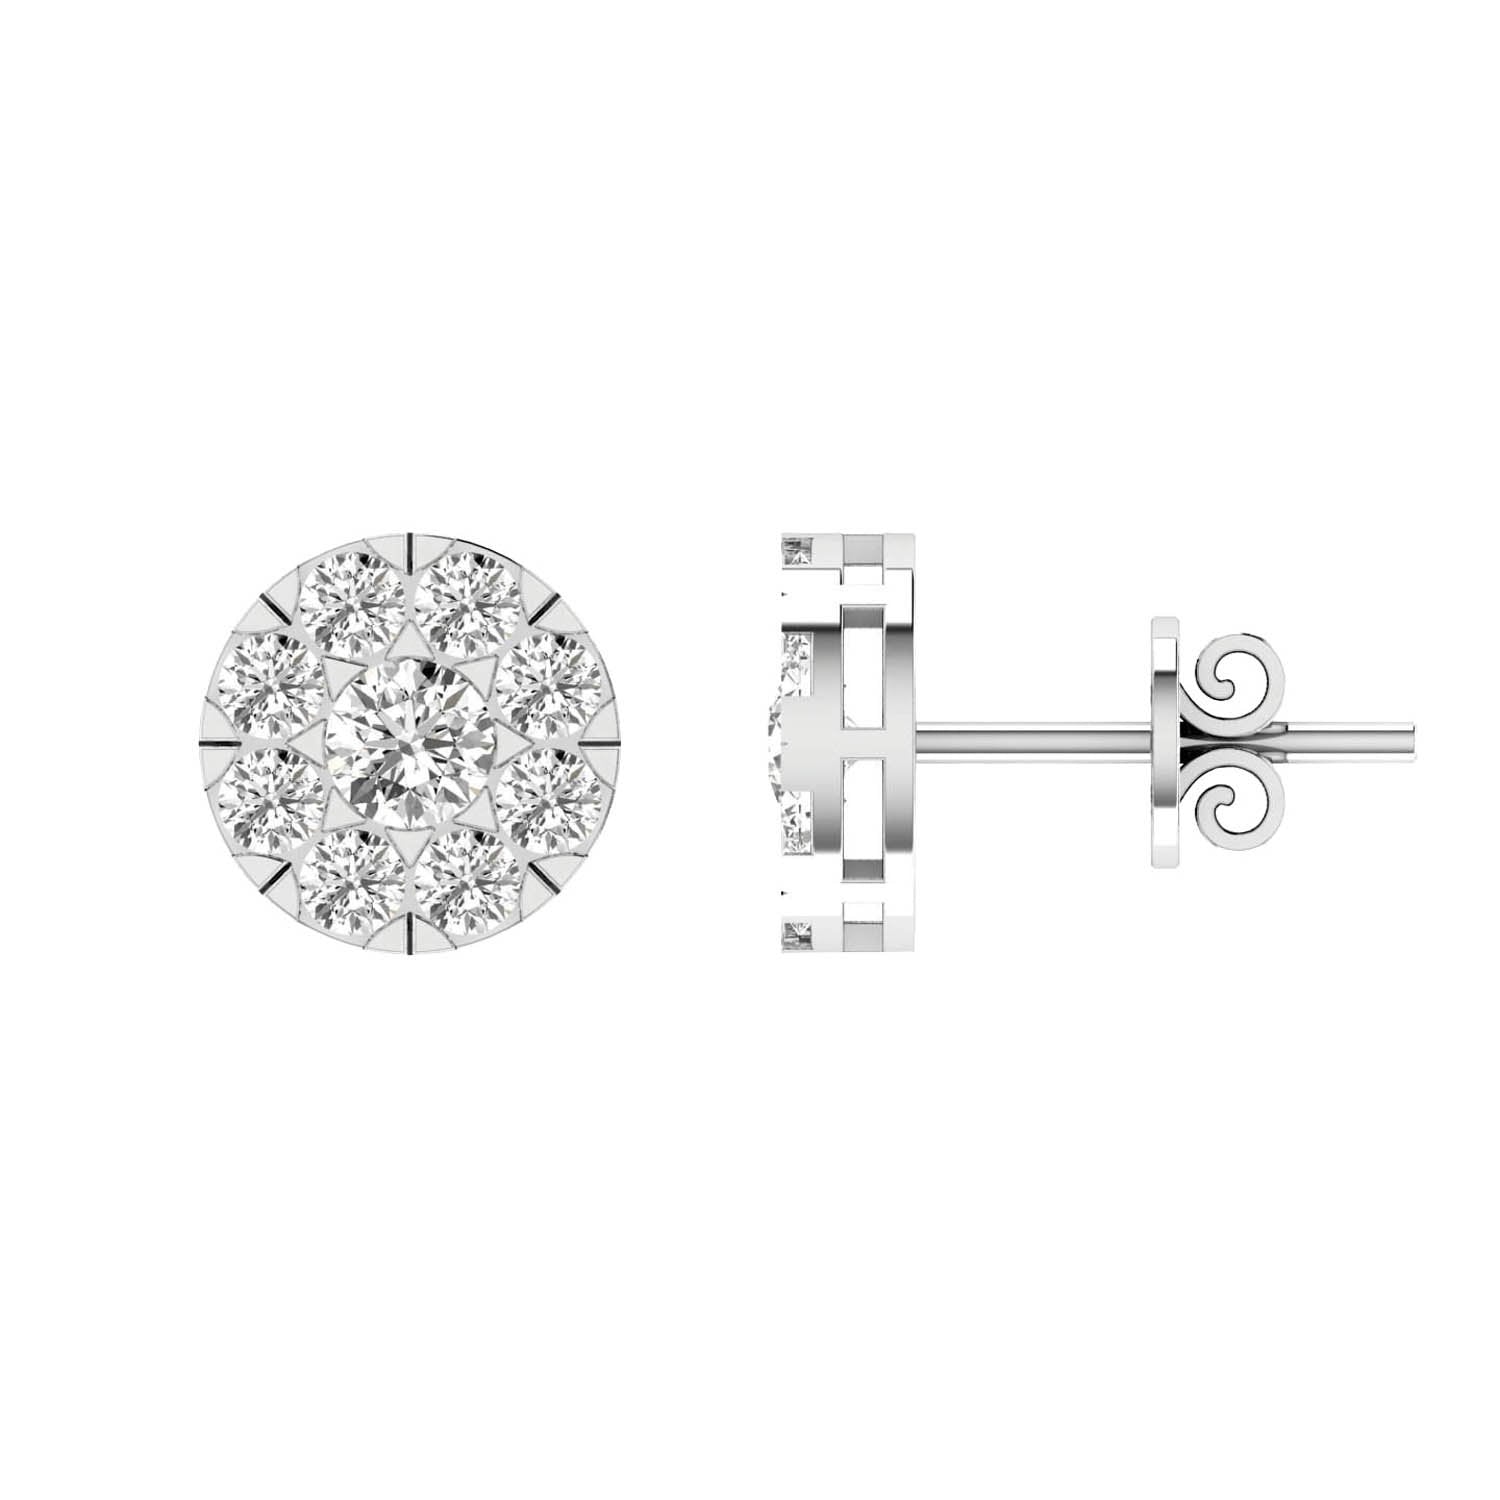 Cluster Diamond Stud Earrings with 0.10ct Diamonds in 9K White Gold - 9WECLUS10GH